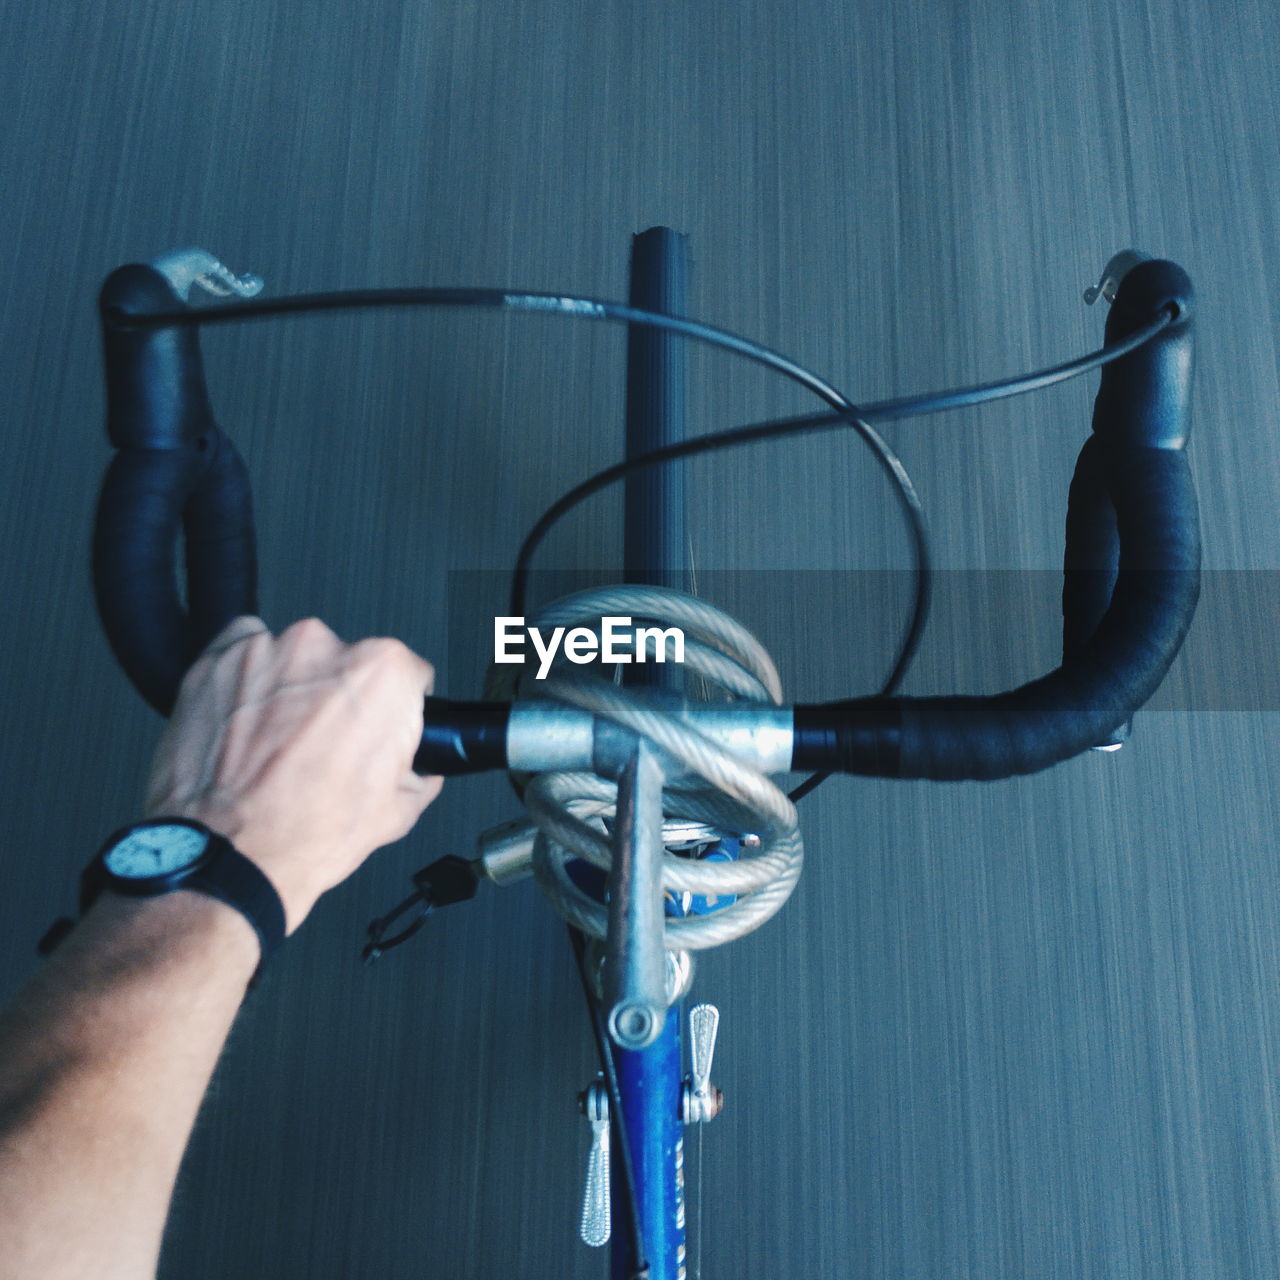 Cropped image of man holding handle while riding bicycle